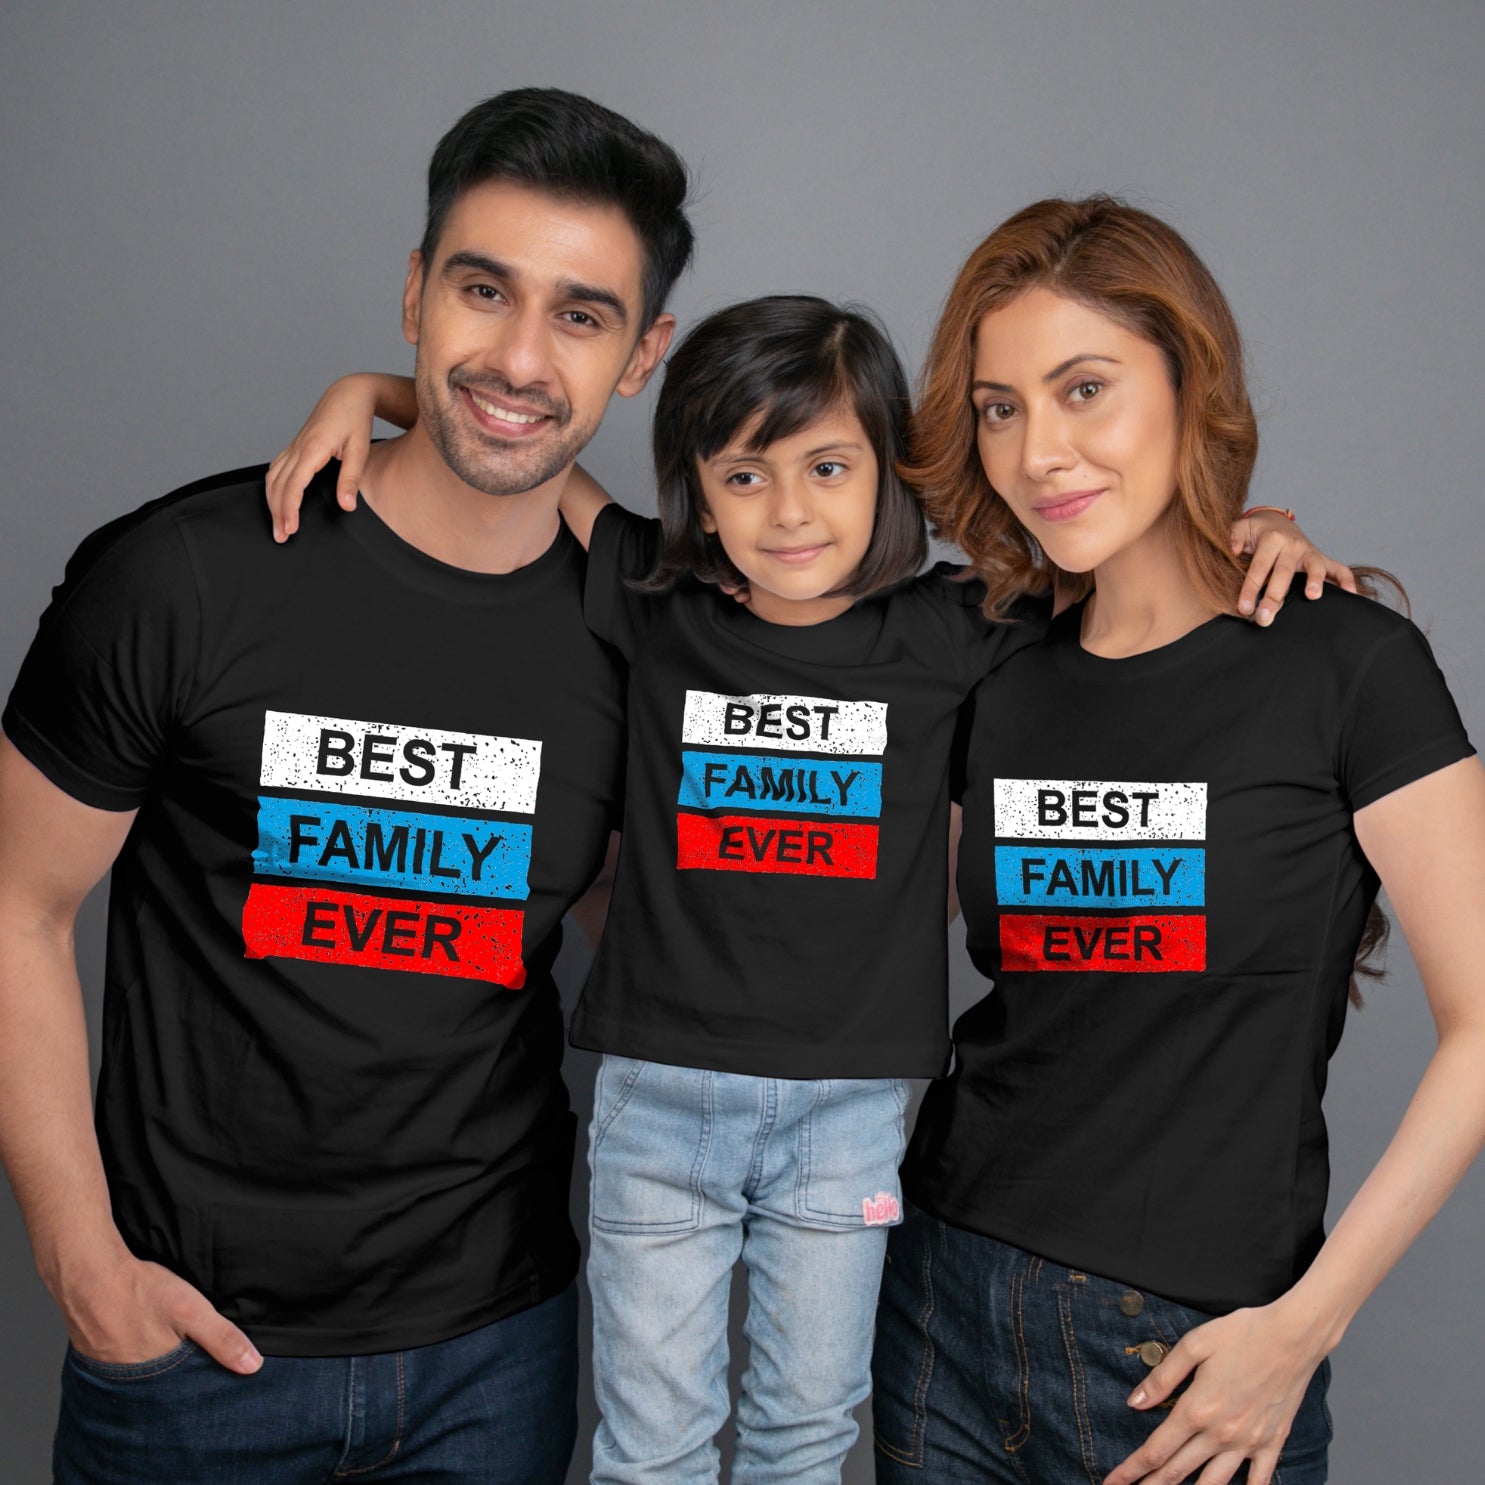 Family t shirt set of 3 Mom Dad Daughter in Black Colour - Best Family Ever Variant